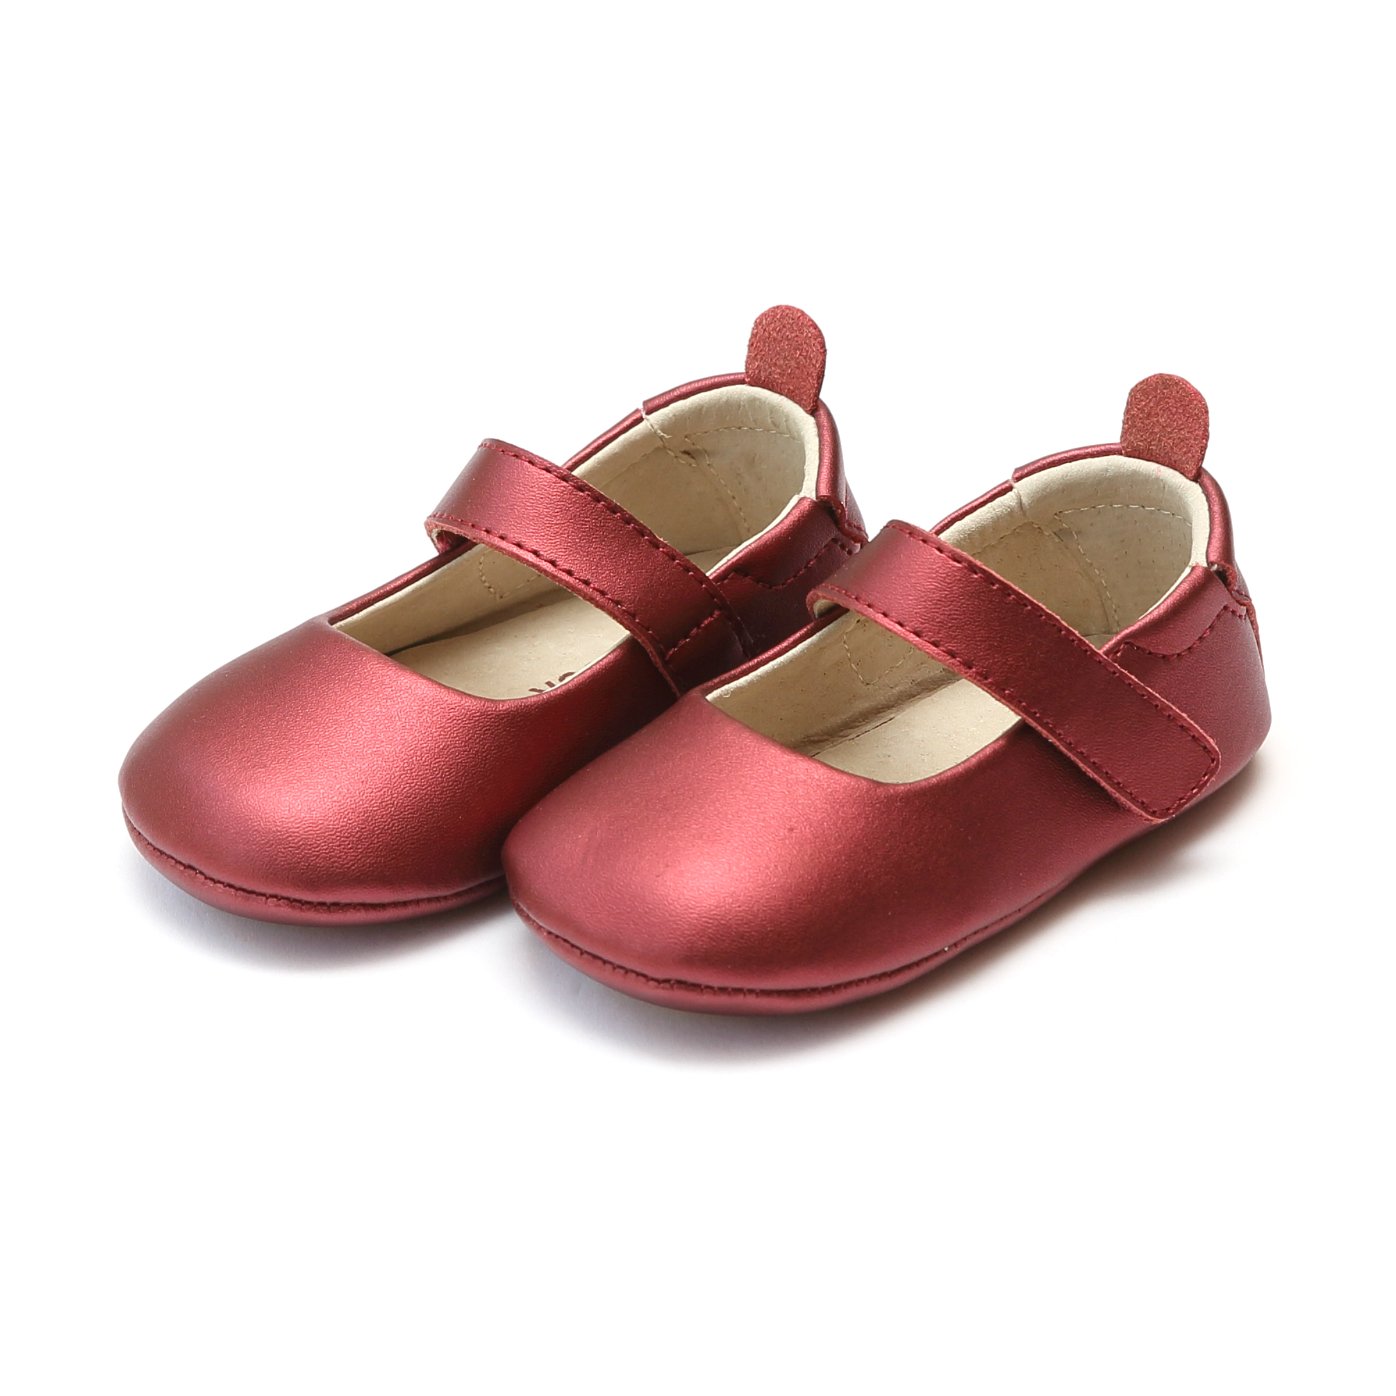 Charlotte Crib Shoe Girls Shoes L'Amour Red 3 